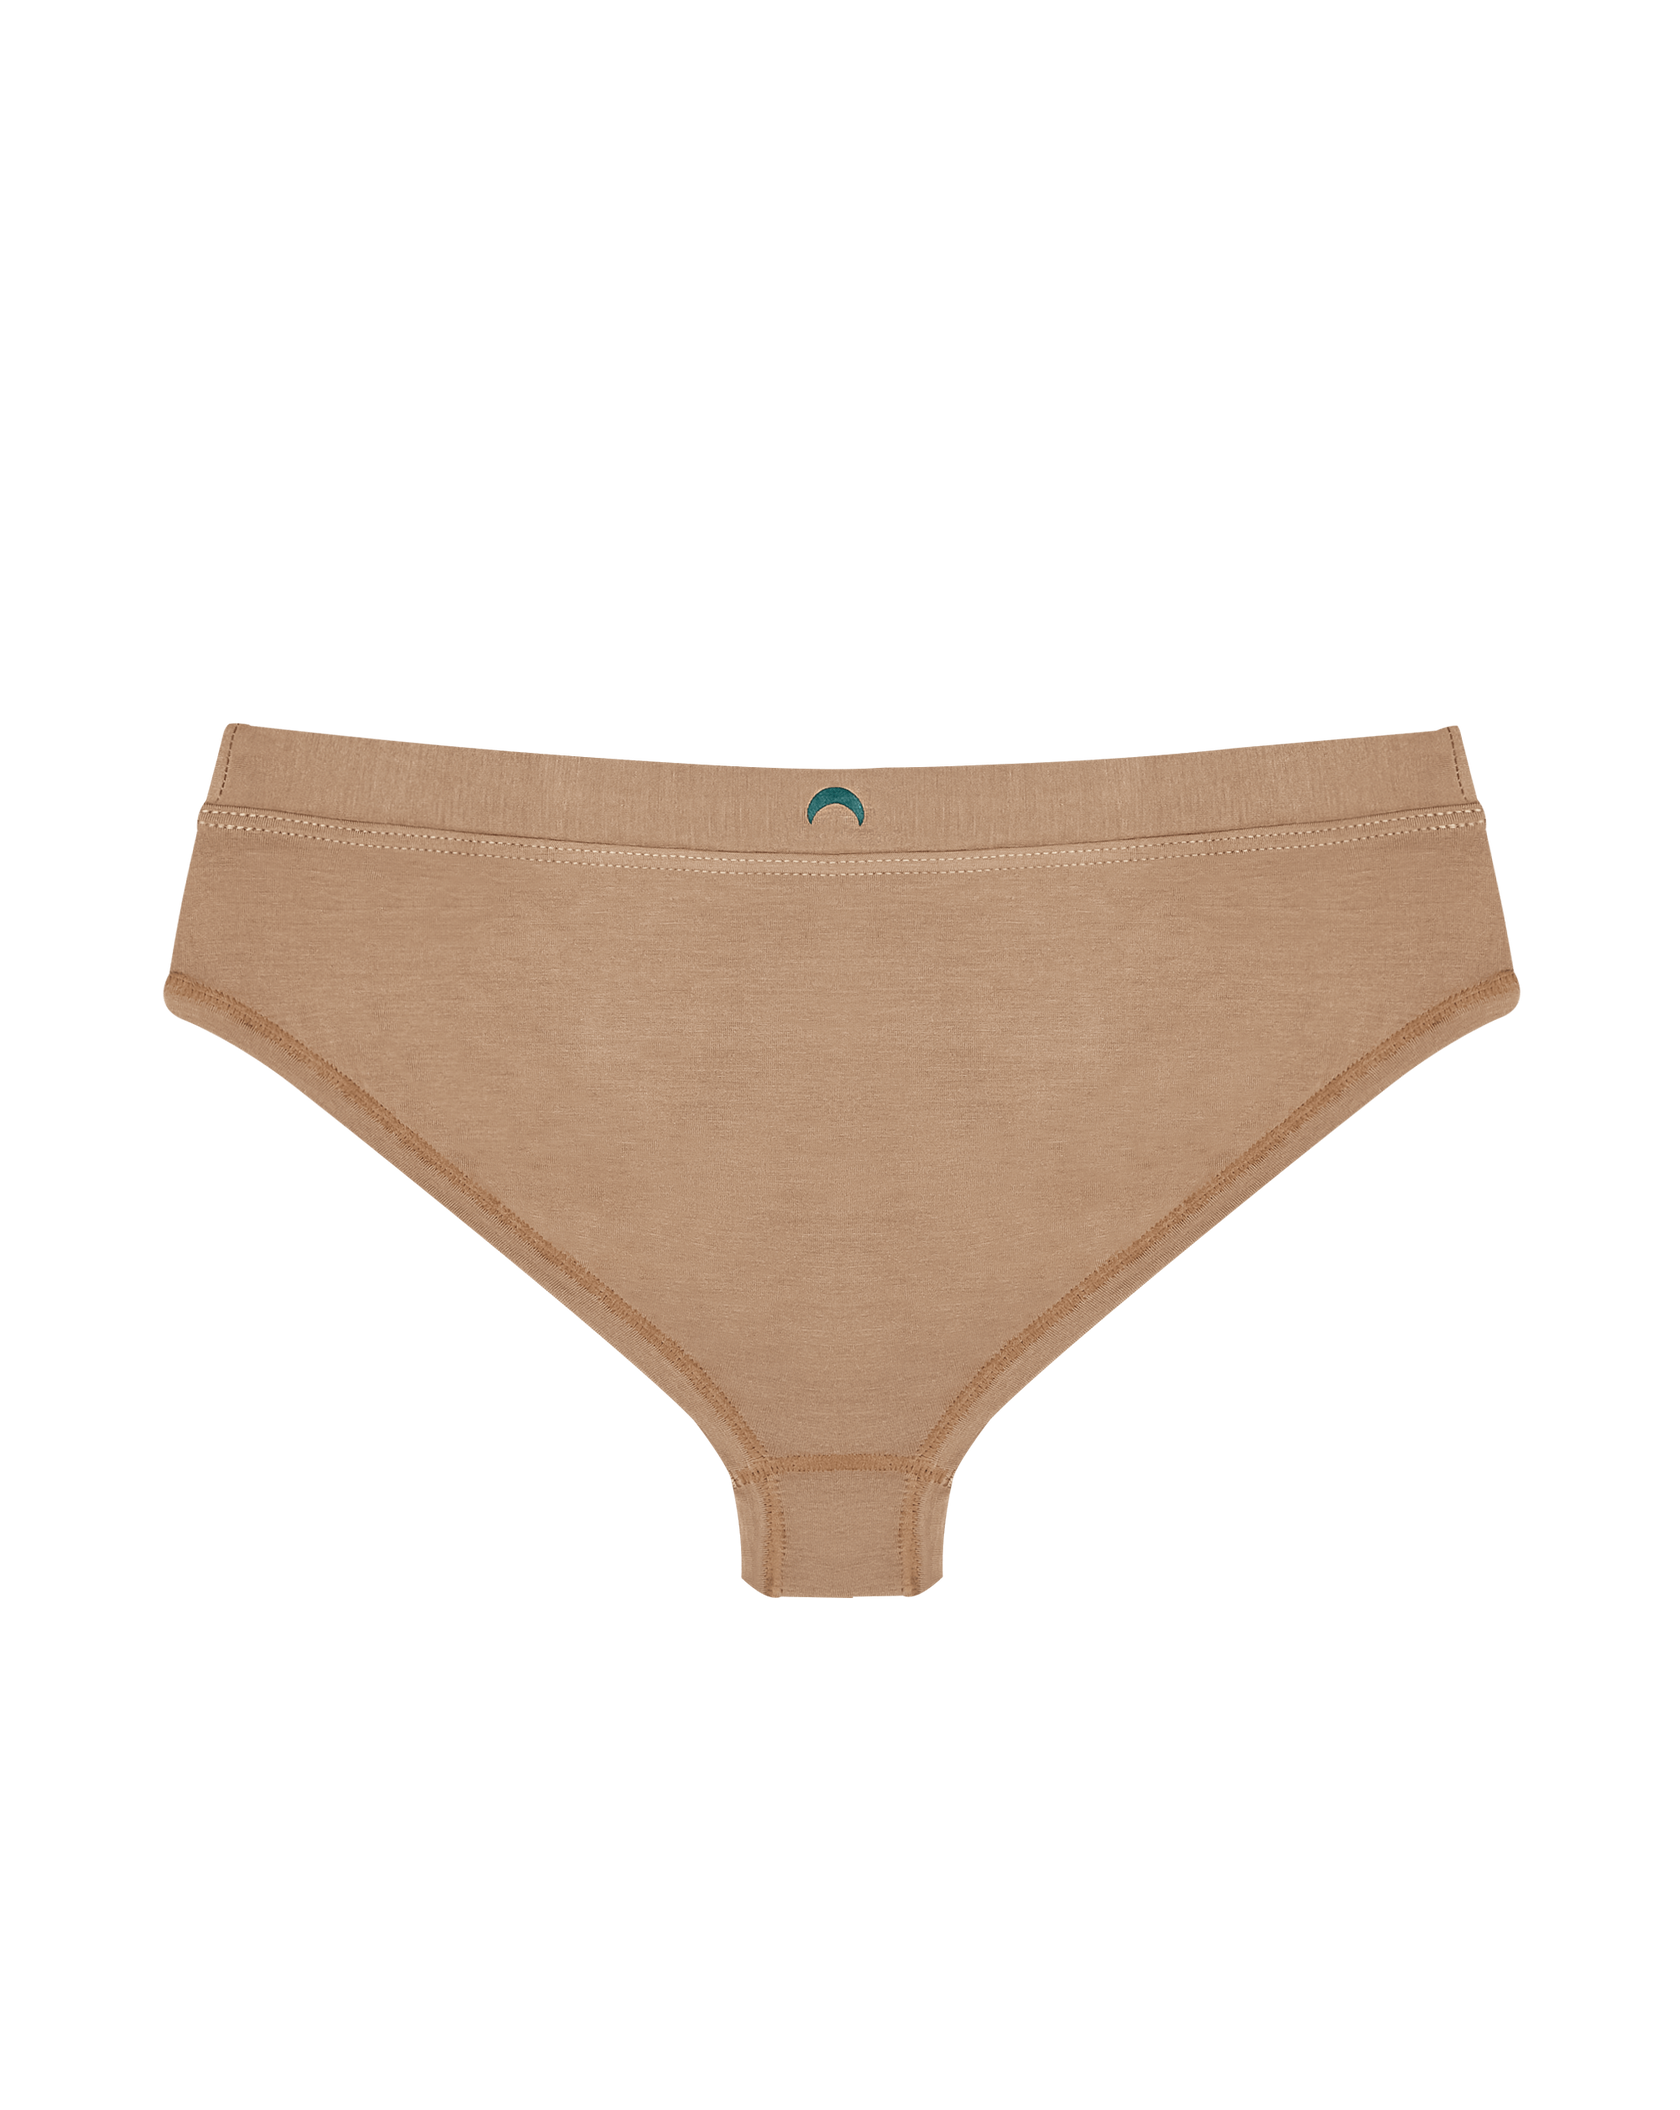 Invisible – The Pantry Underwear